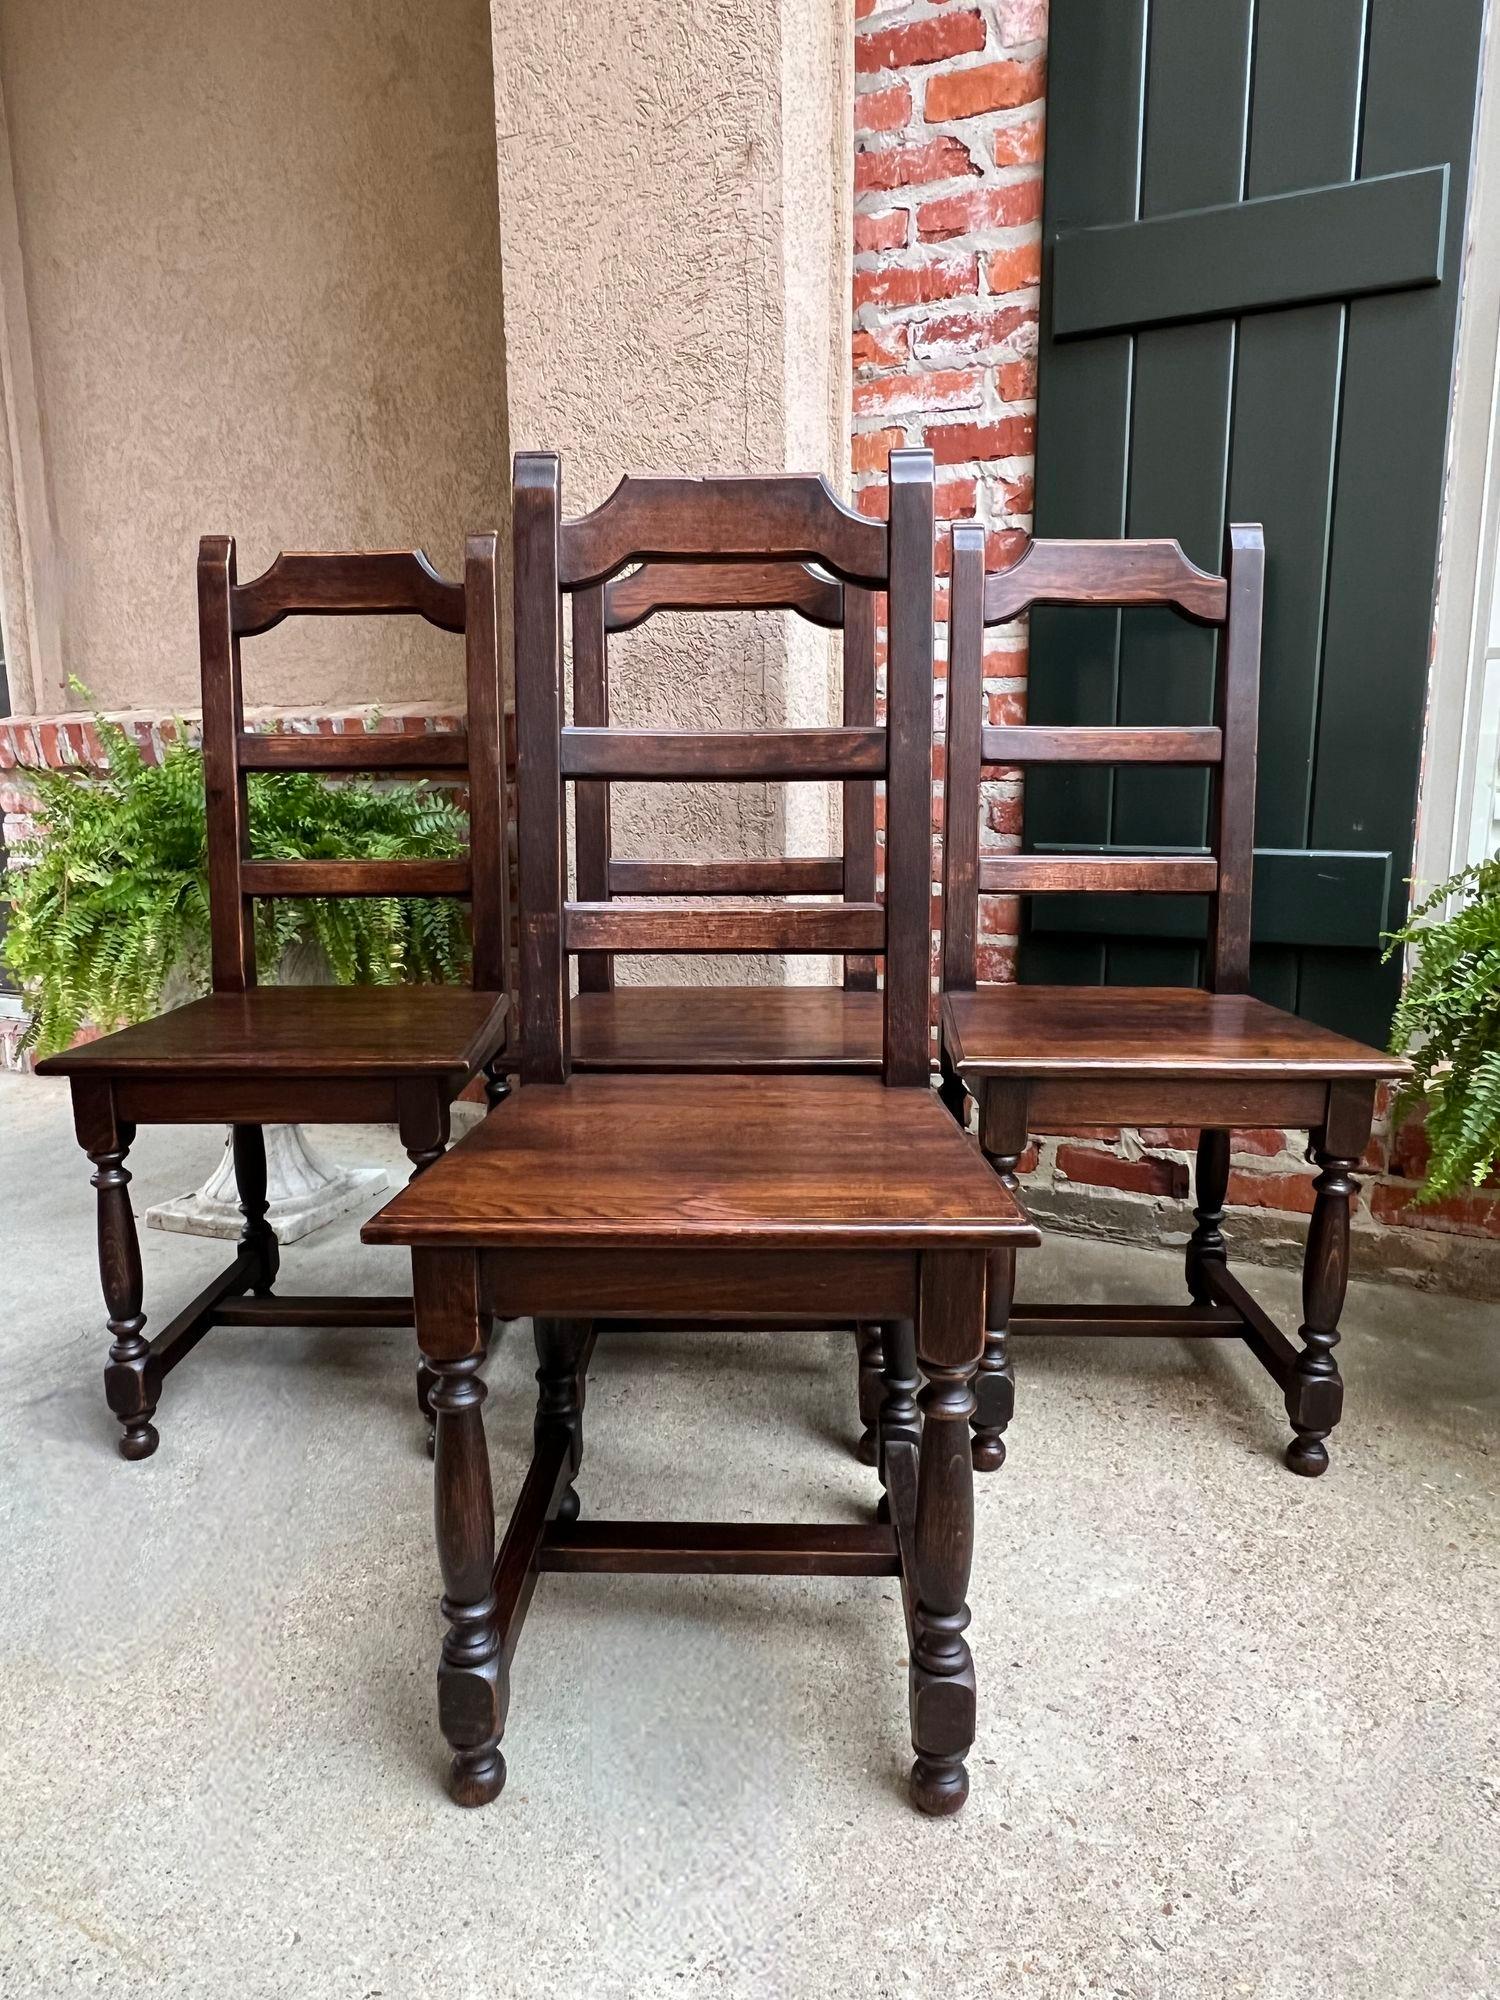 SET 4 Antique French Country Dining Chair Ladder Back Carved Dark Oak.

Direct from France, a set of 4 antique French dining chairs, with classic French style that compliments any décor!
Shaped upper crown with a lovely silhouette that features wide